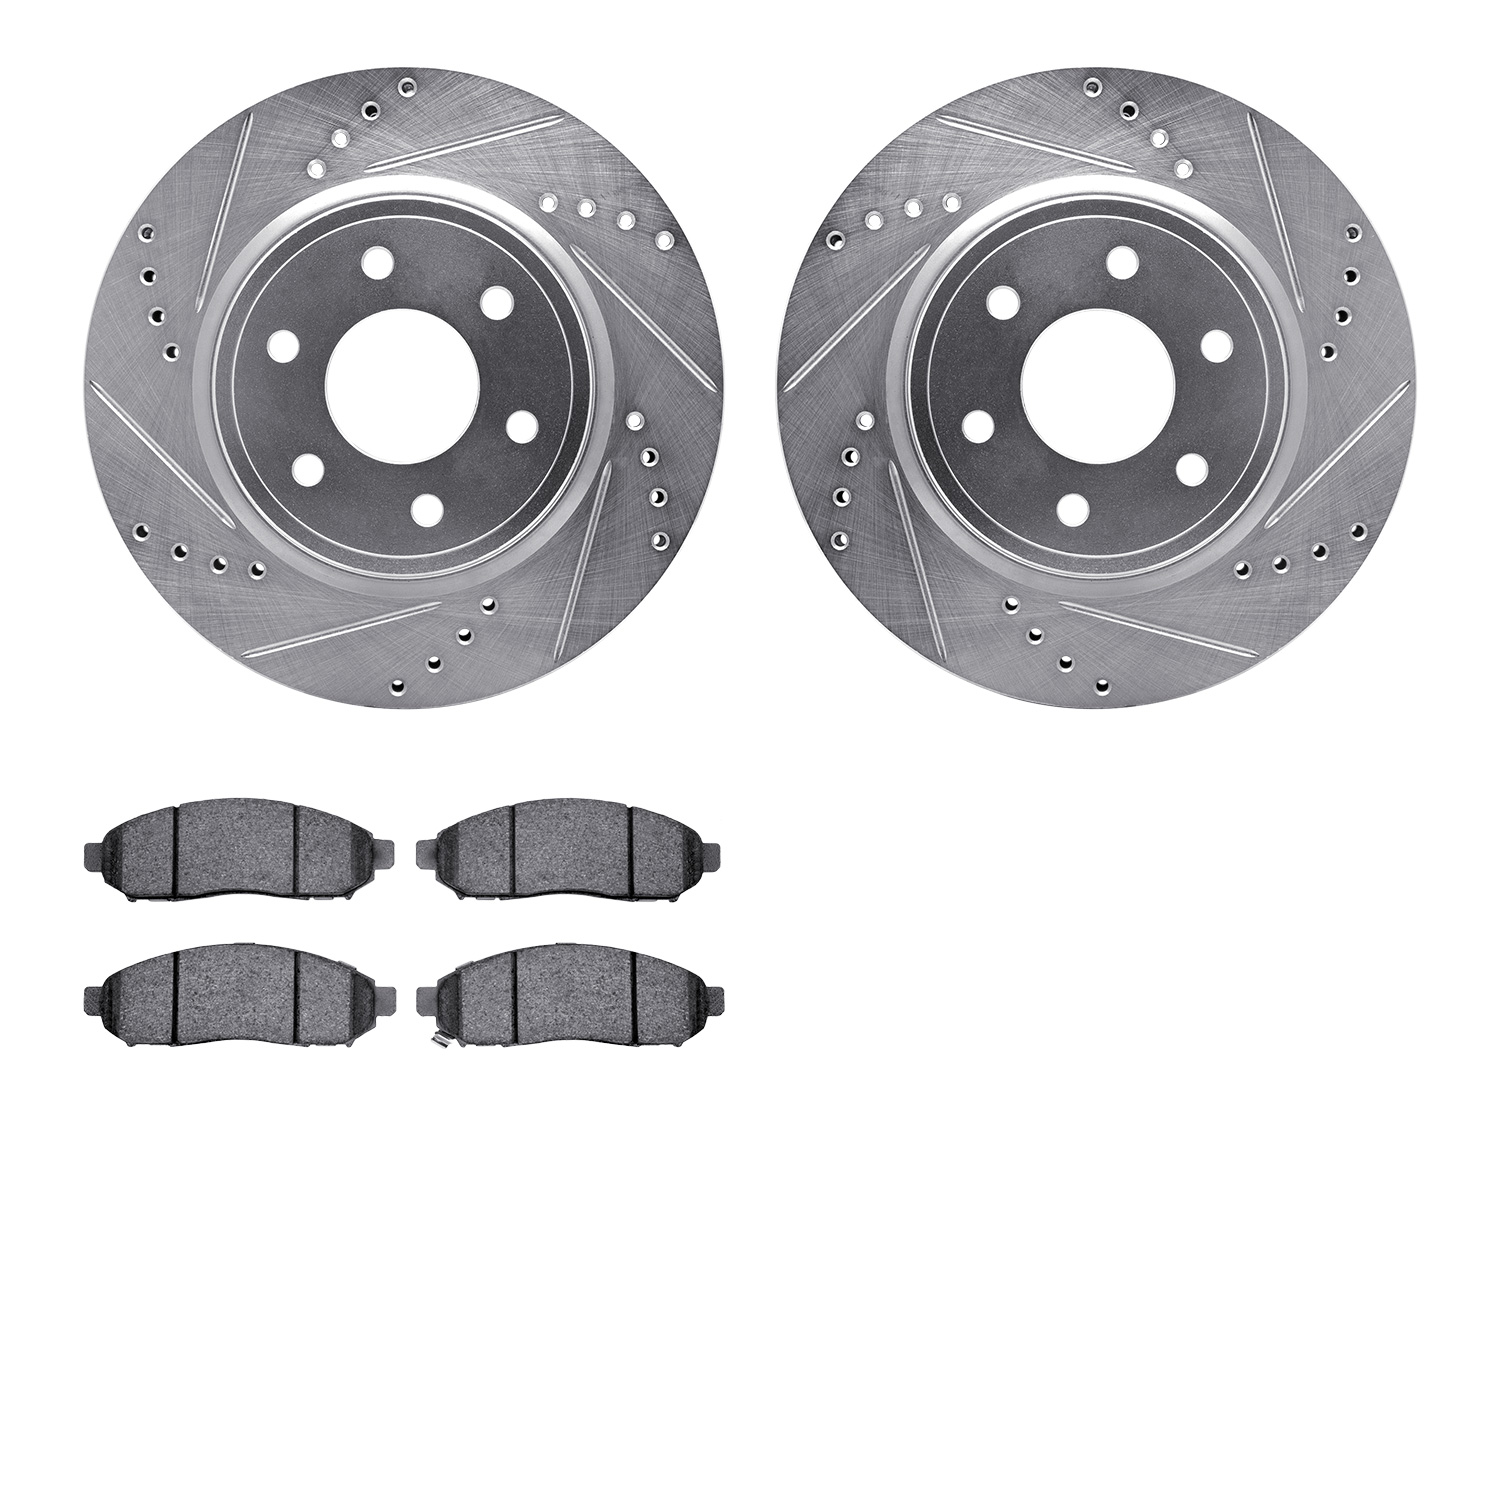 7302-67107 Drilled/Slotted Brake Rotor with 3000-Series Ceramic Brake Pads Kit [Silver], Fits Select Multiple Makes/Models, Posi